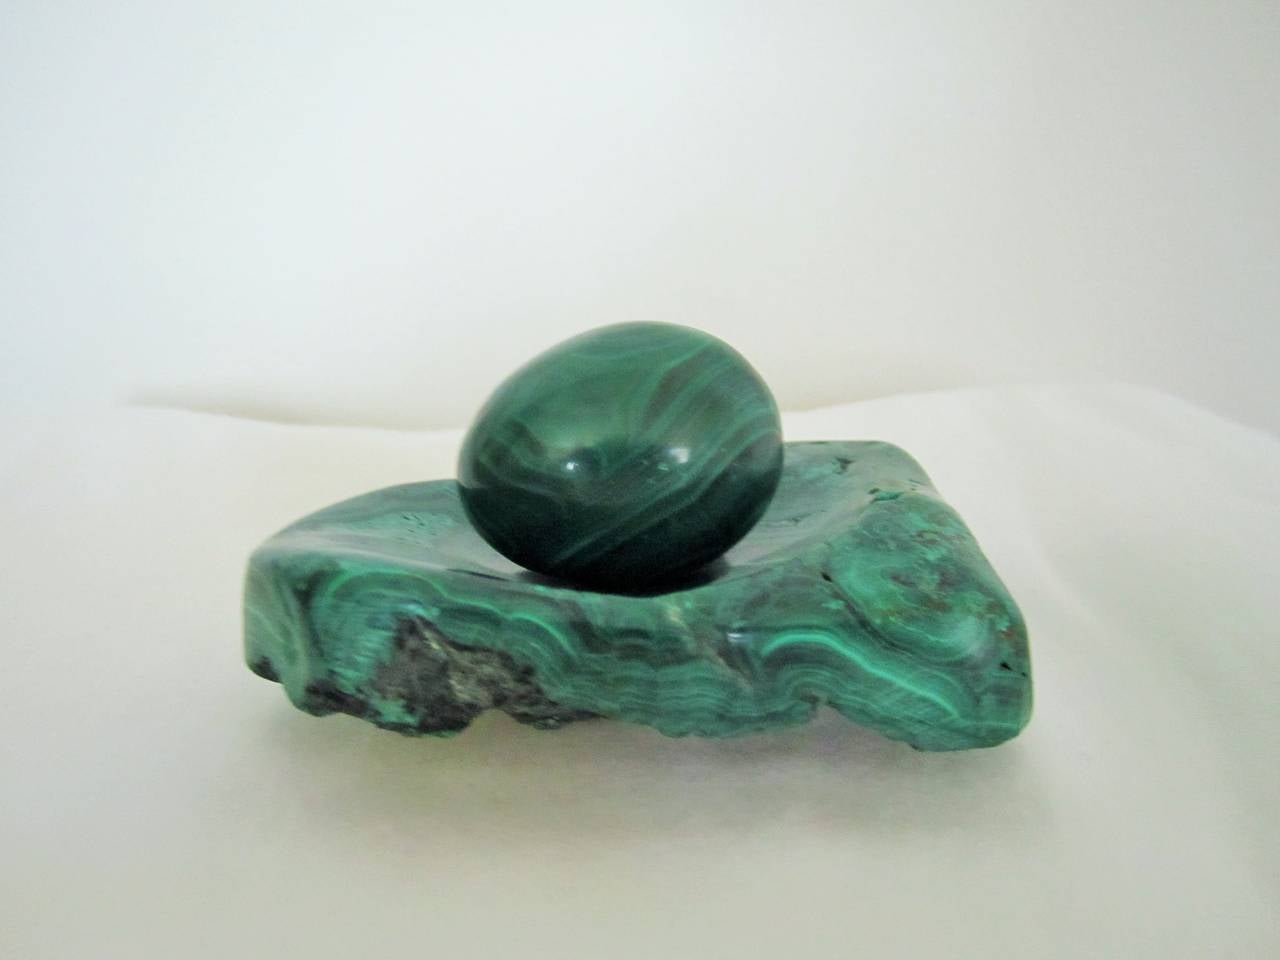 A vintage malachite decorative piece - malachite dish with malachite object or 'egg'. Beautiful decorative piece for a table, desk or shelf. Can serve as a small dish and/or paperweight.

Item available here online, or at my showroom space in the